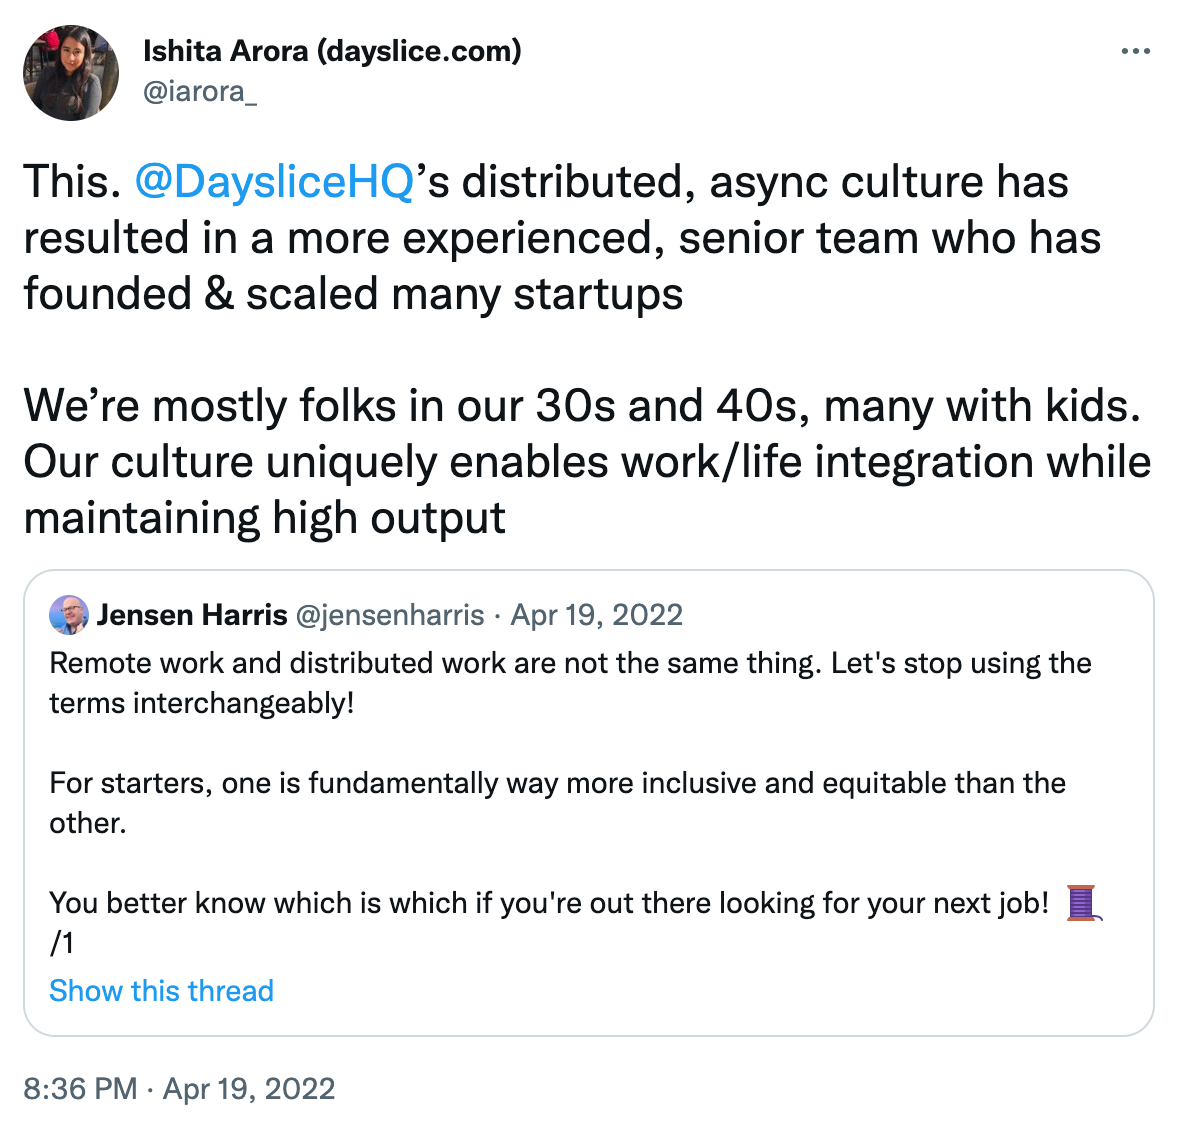 A retweet by Ishita Arora of a tweet by Jensen Harris. The original tweet reads: Remote work and distributed work are not the same thing. Let's stop using the terms interchangeably! For starters, one is fundamentally way more inclusive and equitable than the other. You better know which is which if you're out there looking for your next job!  Quote tweet from Ishita reads: This. @DaysliceHQ's distributed, async culture has resulted in a more experienced, senior team who has founded and scaled many startups. We're mostly folks in our 30's and 40's, many with kids. Our culture uniquely enables work/life integration while maintaining high output.